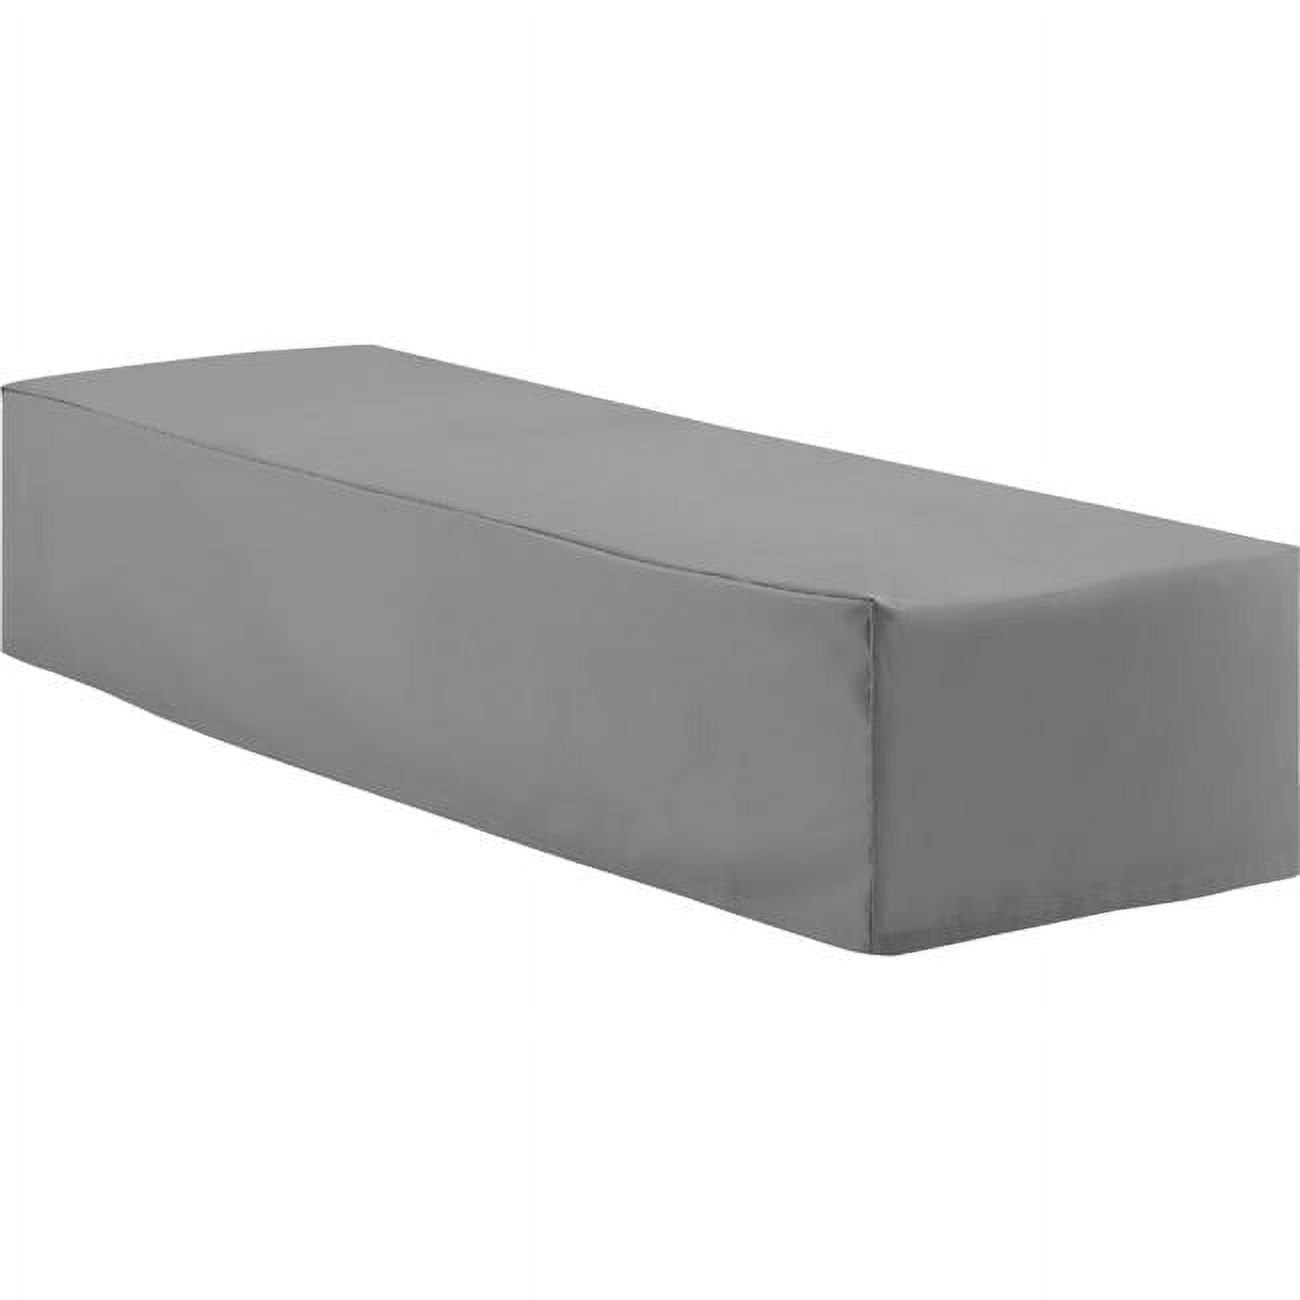 Crosley Furniture Patio Polyester Fabric Chaise Lounge Cover in Gray - image 1 of 7